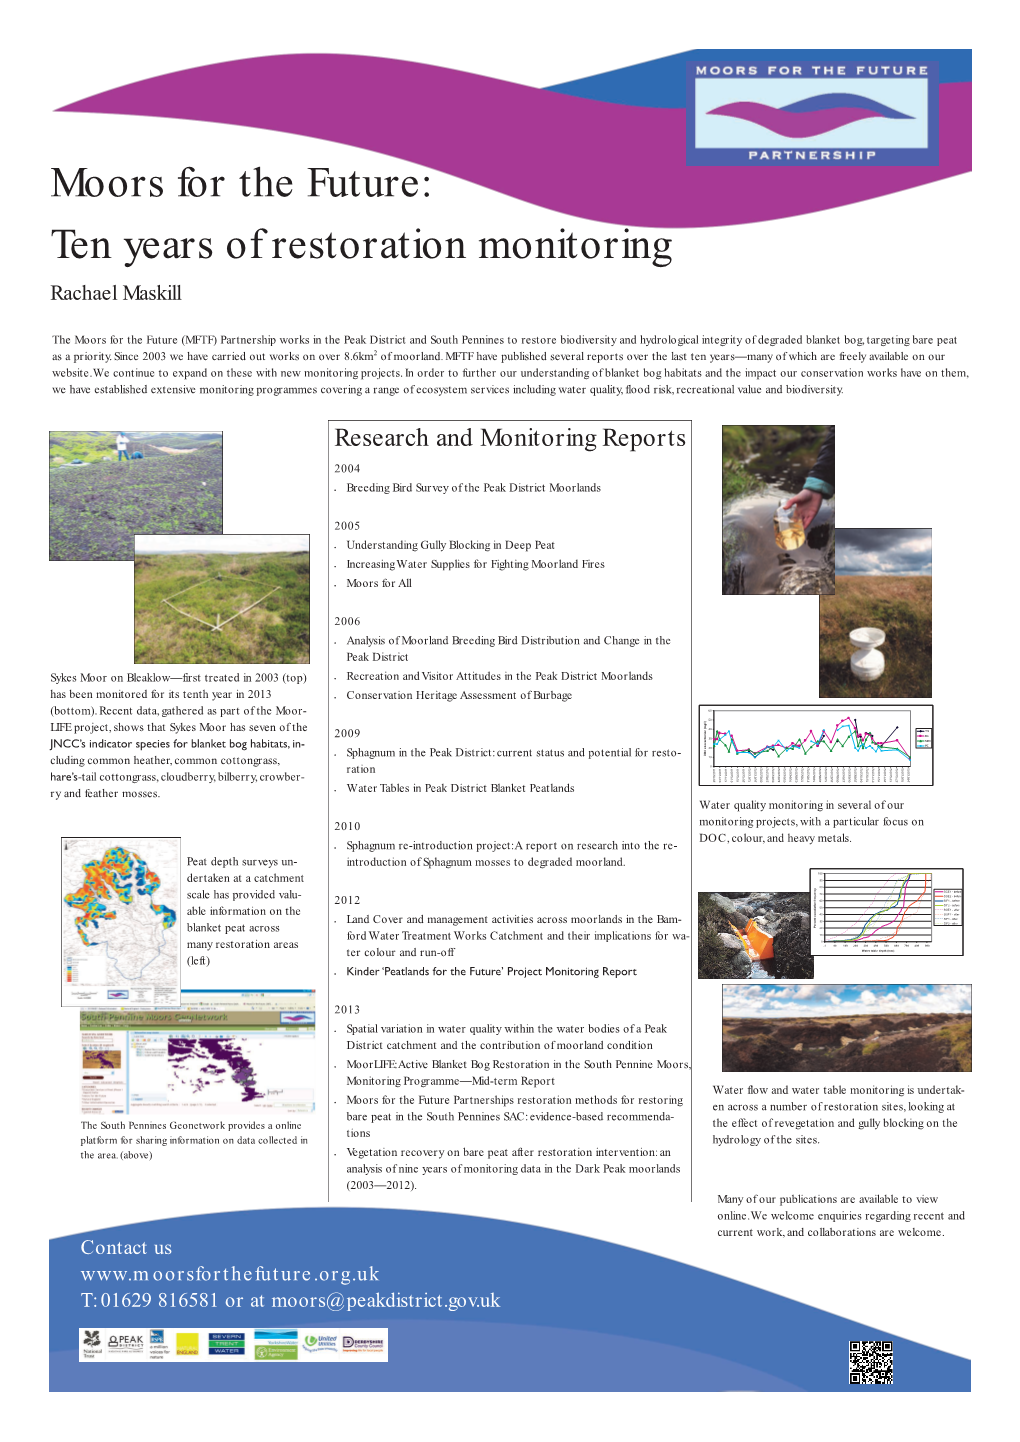 Research and Monitoring Reports 2004